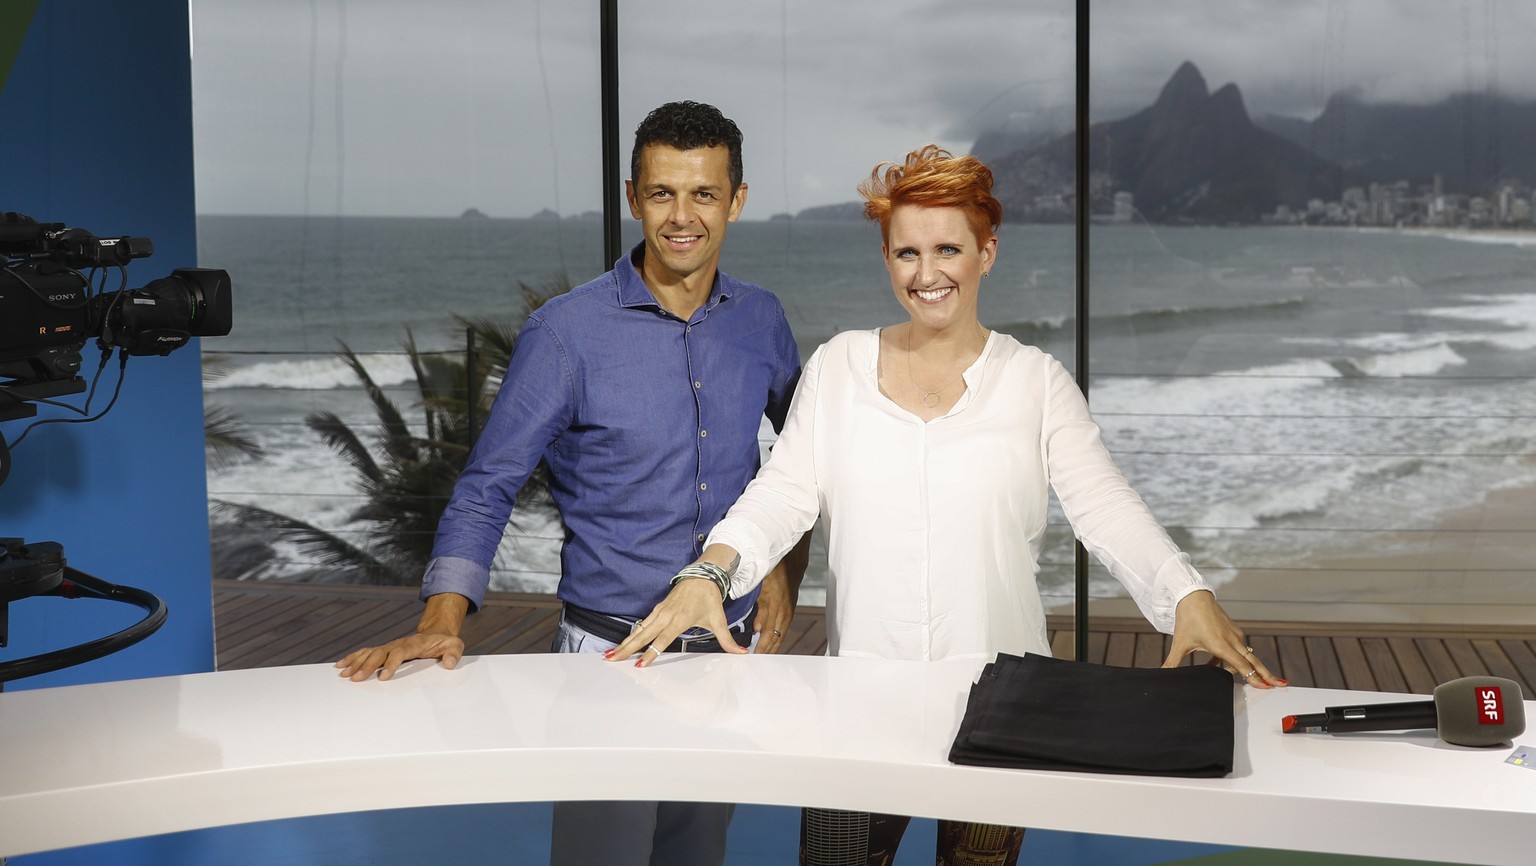 Swiss sport moderators Jann Billeter, left, and Steffi Buchli, right, are pictured during a media tour in the SRG TV-Studio at Ipanema beach, in Rio de Janeiro, Brazil, prior to the Rio 2016 Olympic S ...